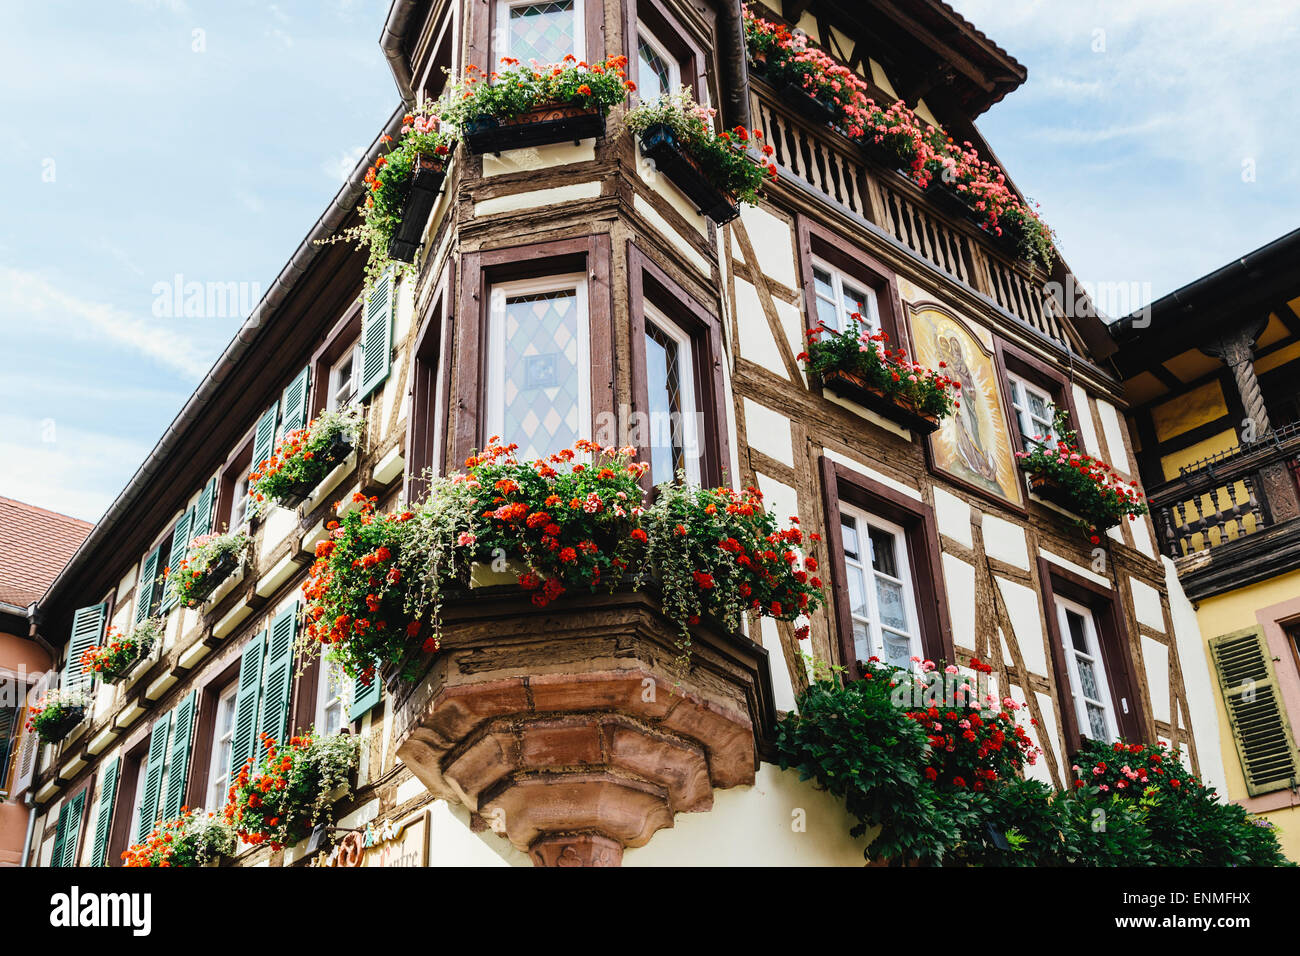 Detail of building, Kaysersberg, Alsace, France Stock Photo